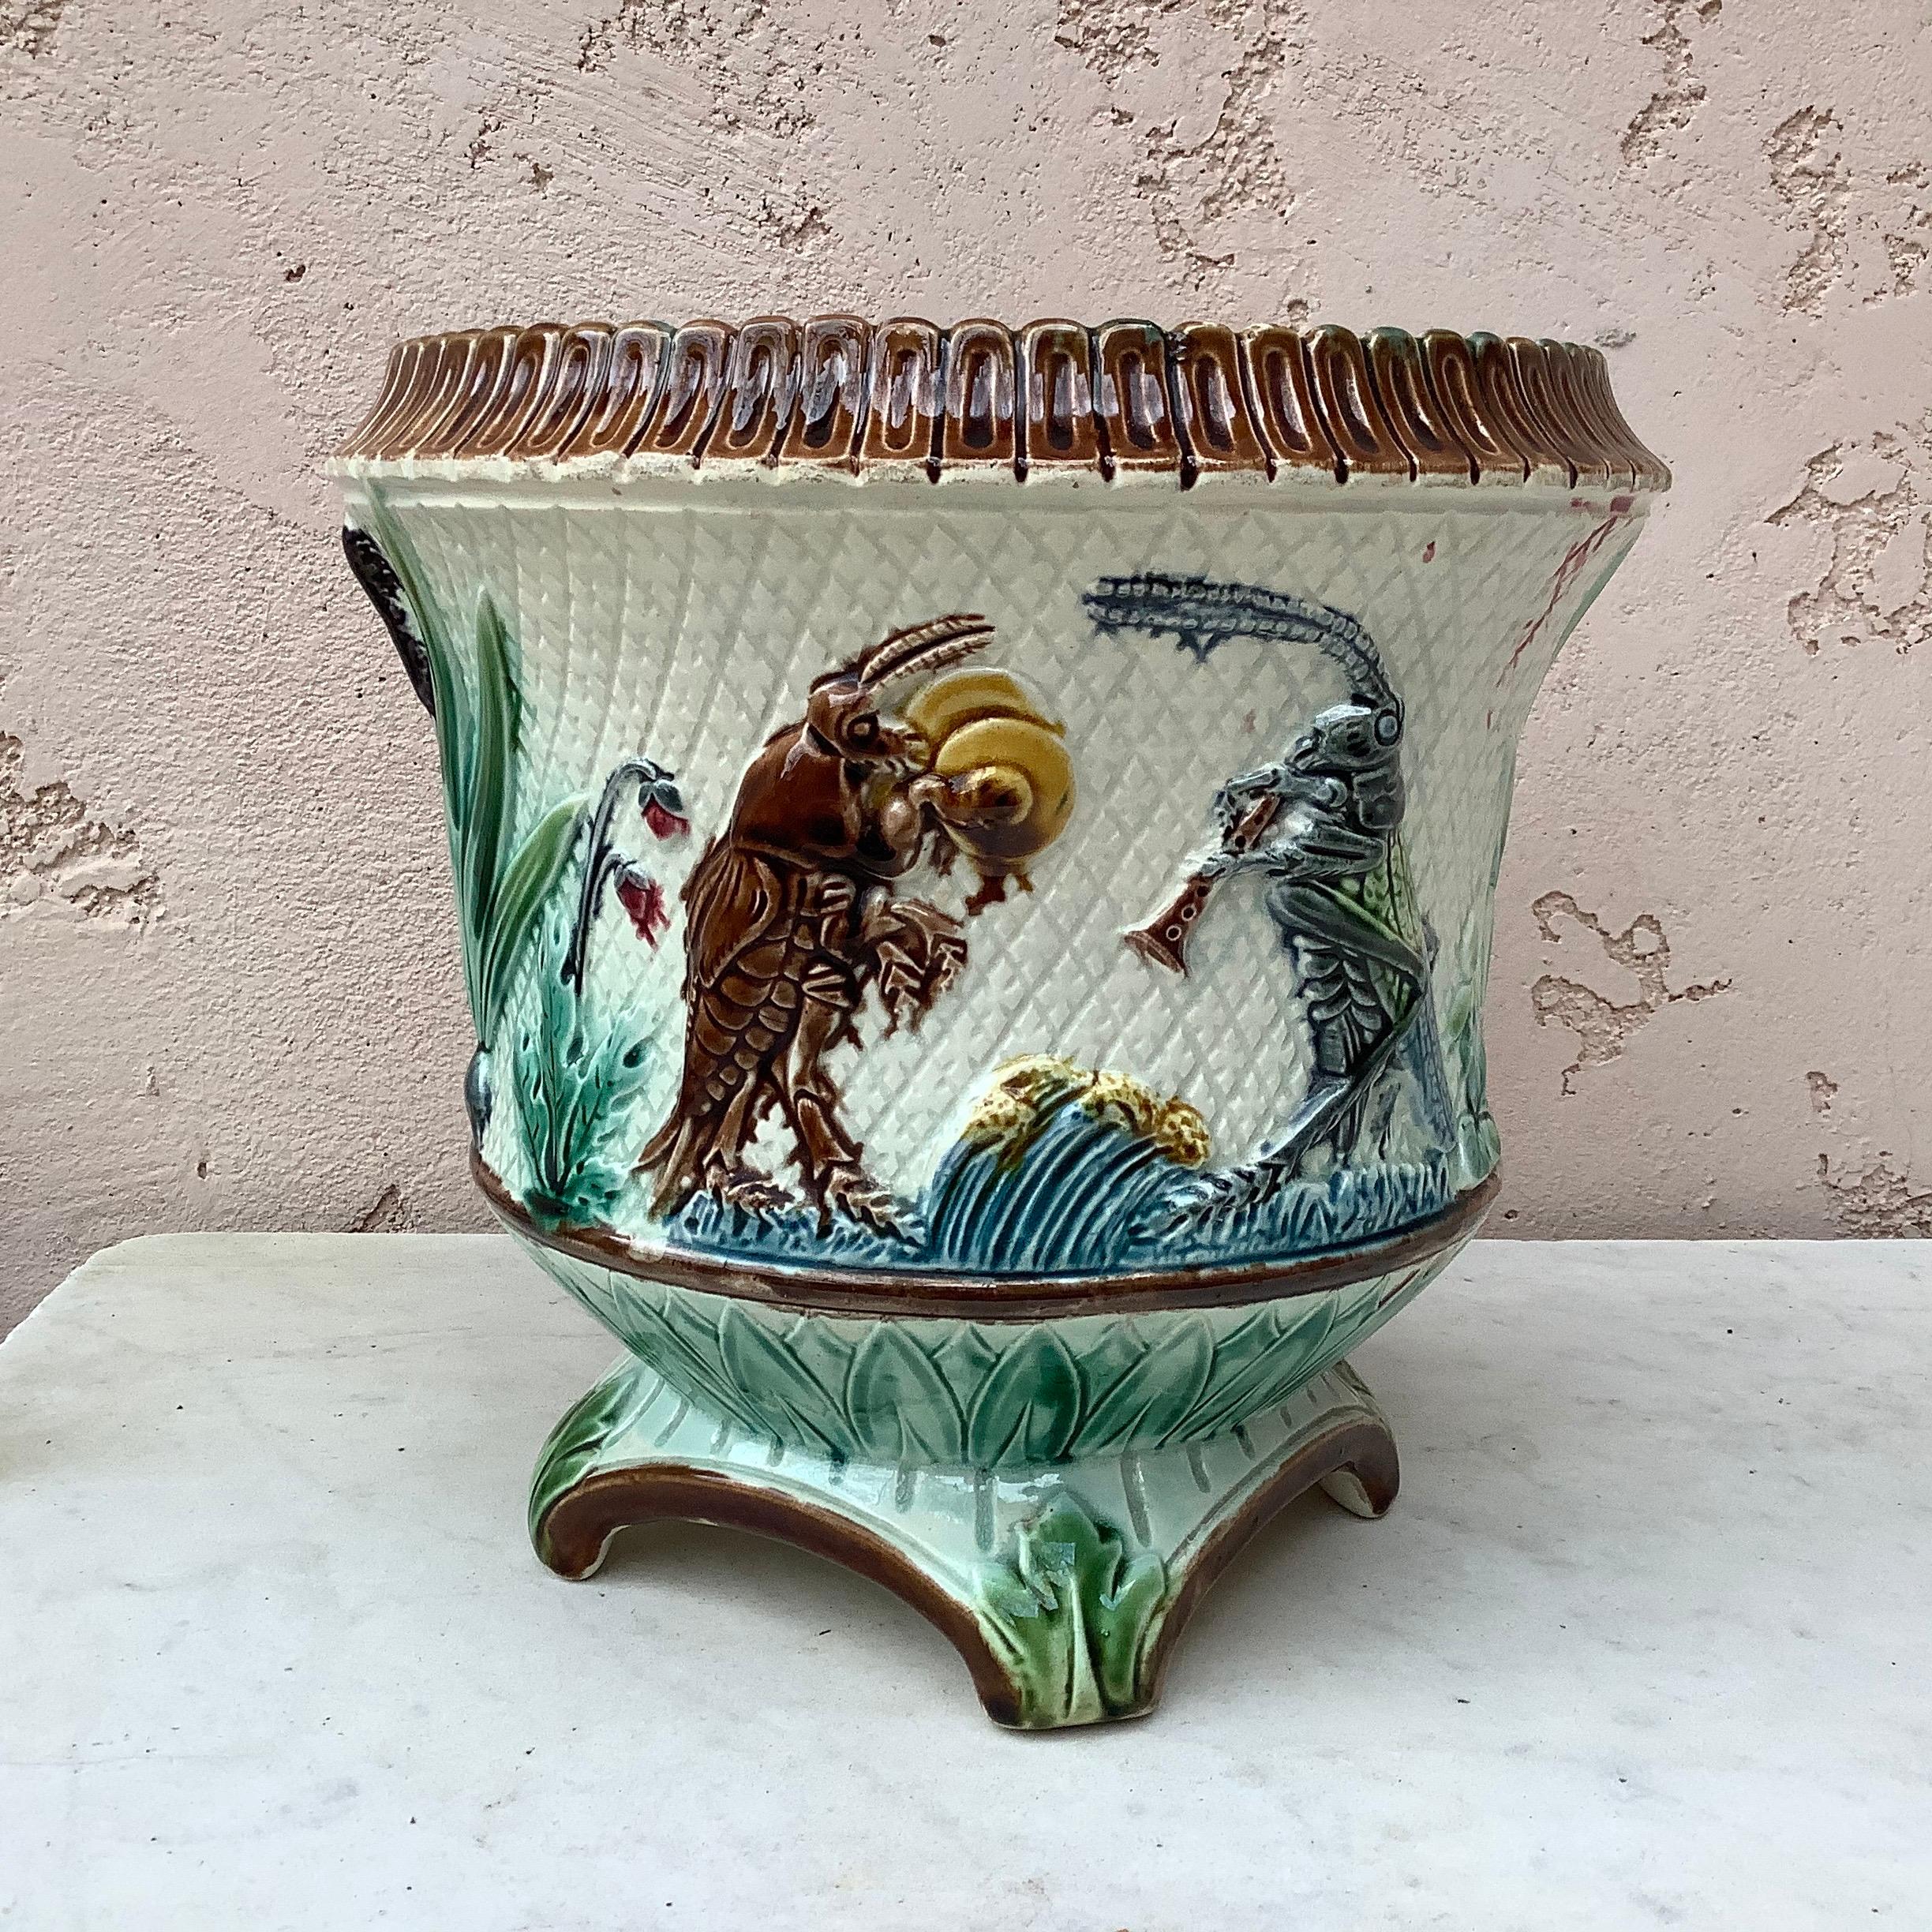 Unusual and humoristic 19th century French Majolica cache pot planter with insects playing musicals instruments.
Decorated with leaves and flowers.